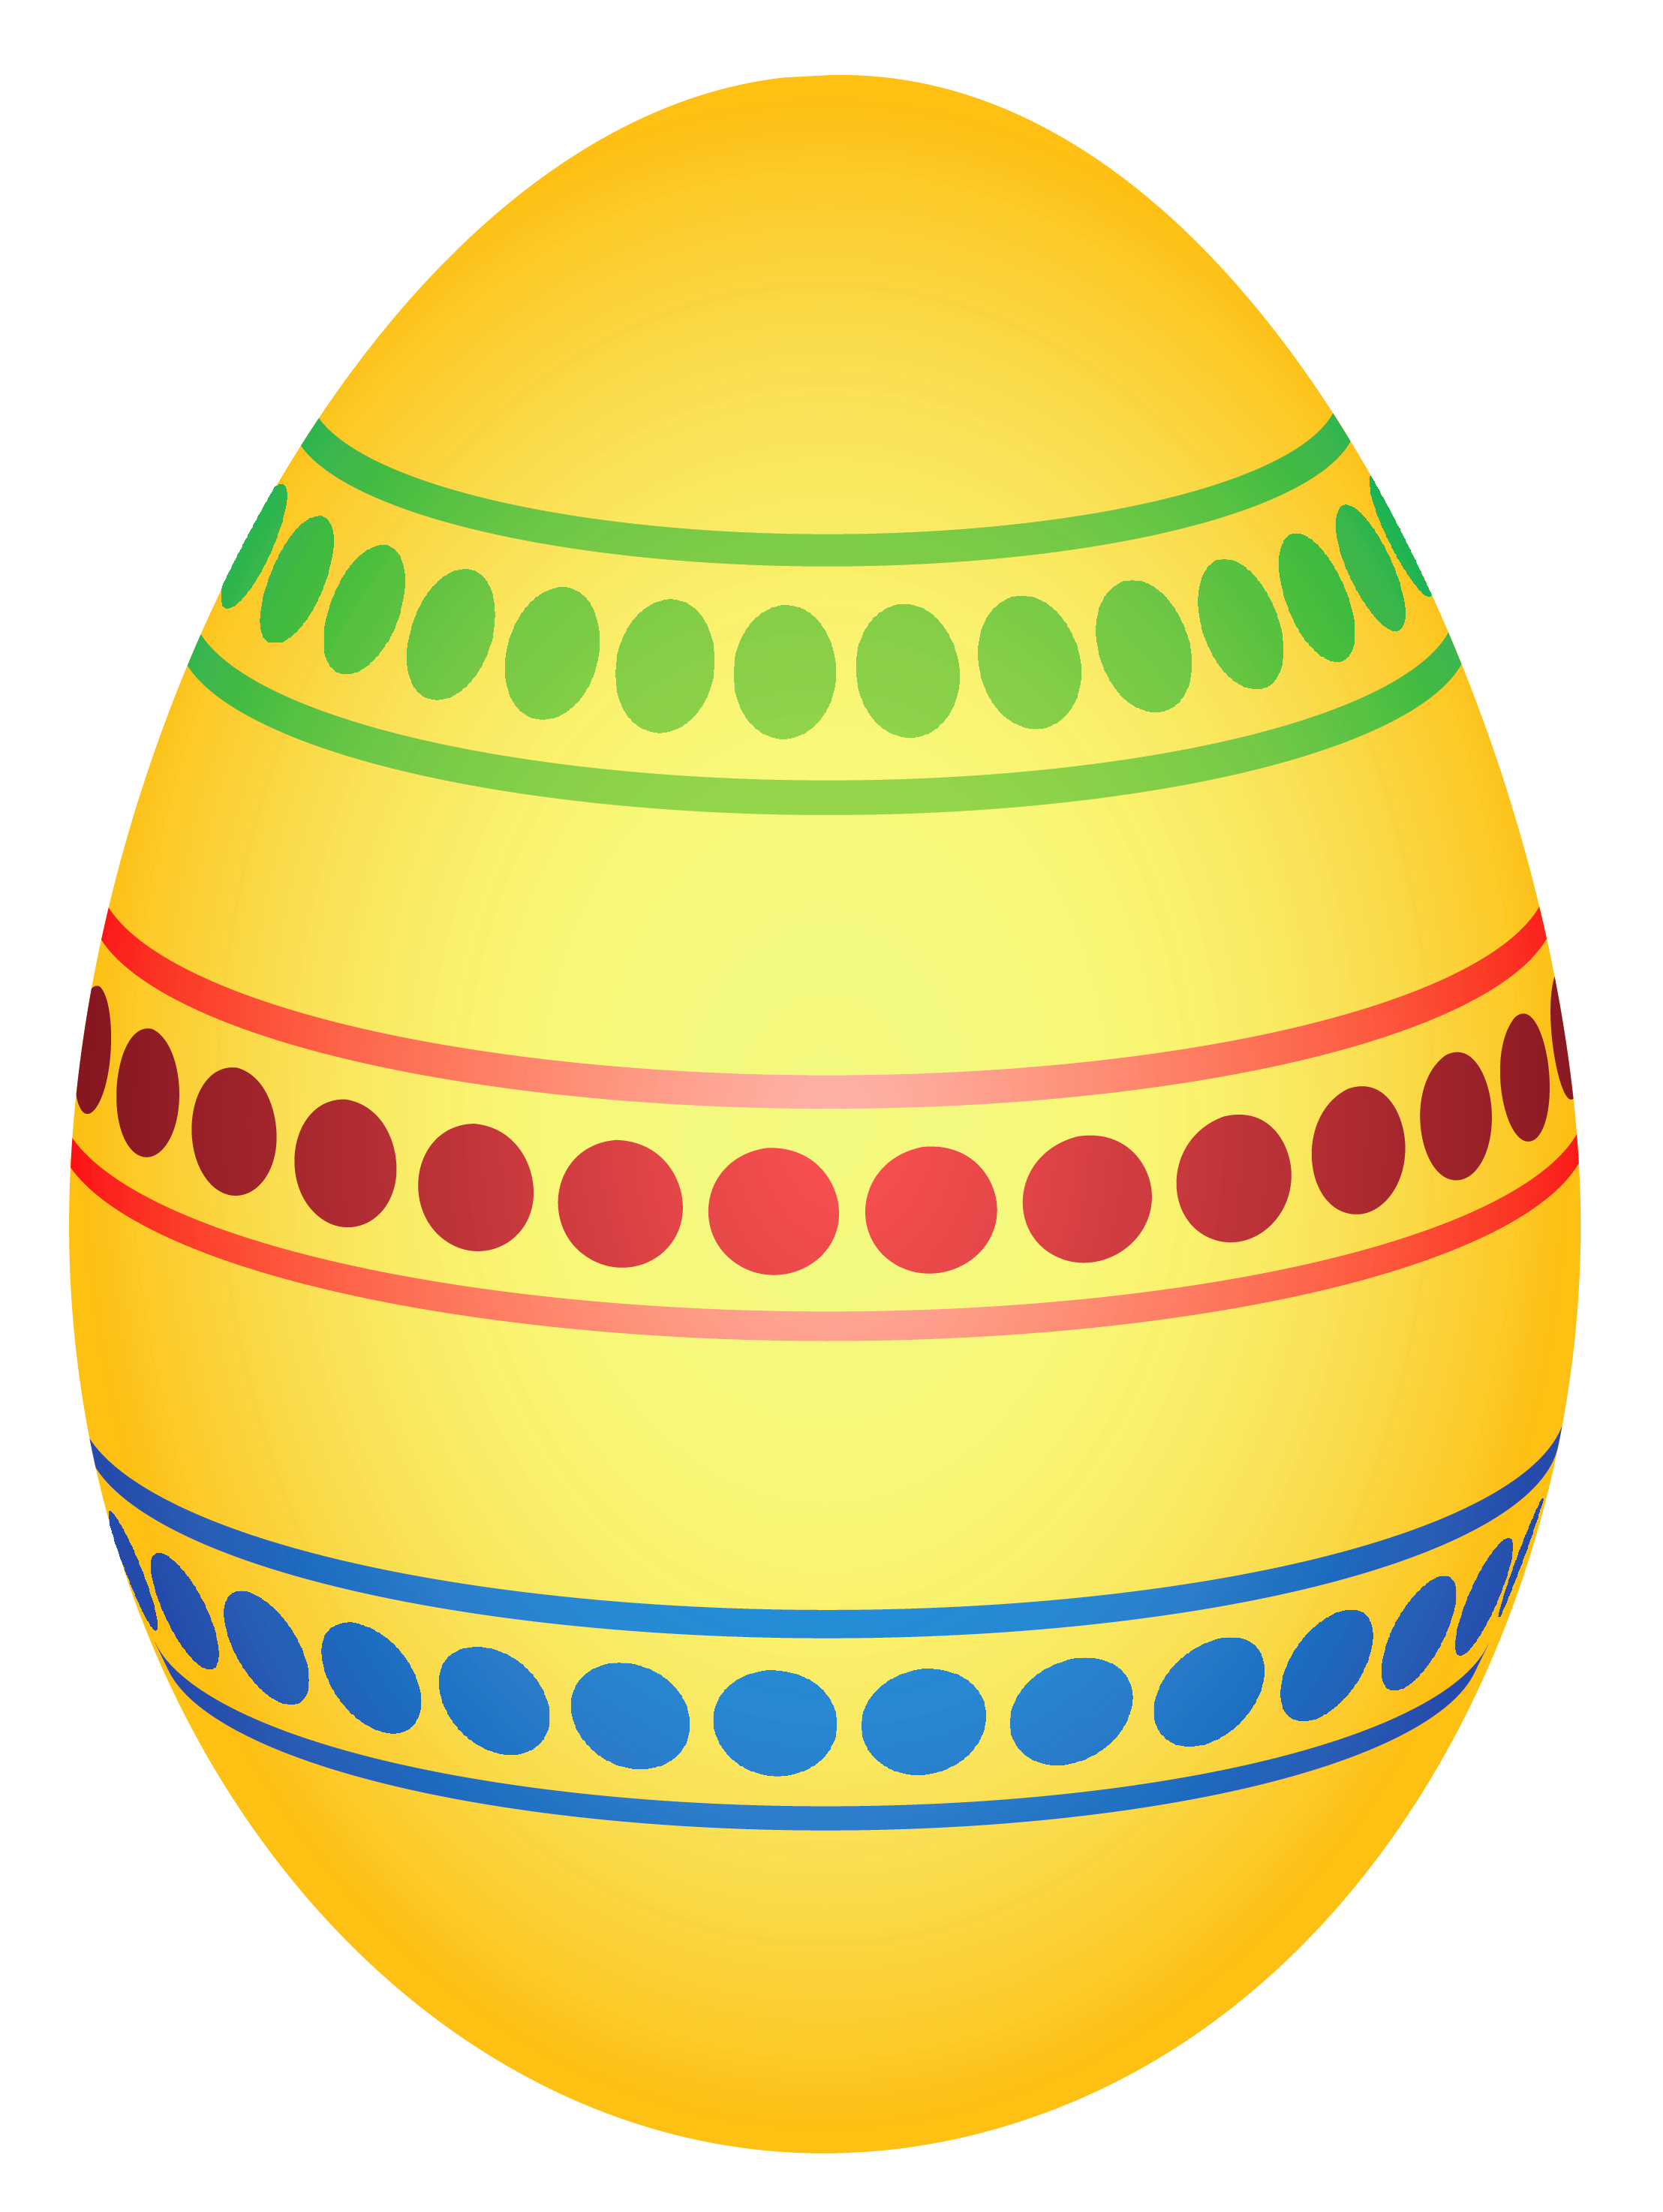 yellow colorful dotted easter egg png clipairt picture gallery yopriceville high quality images and transparent png free clipart yellow colorful dotted easter egg png